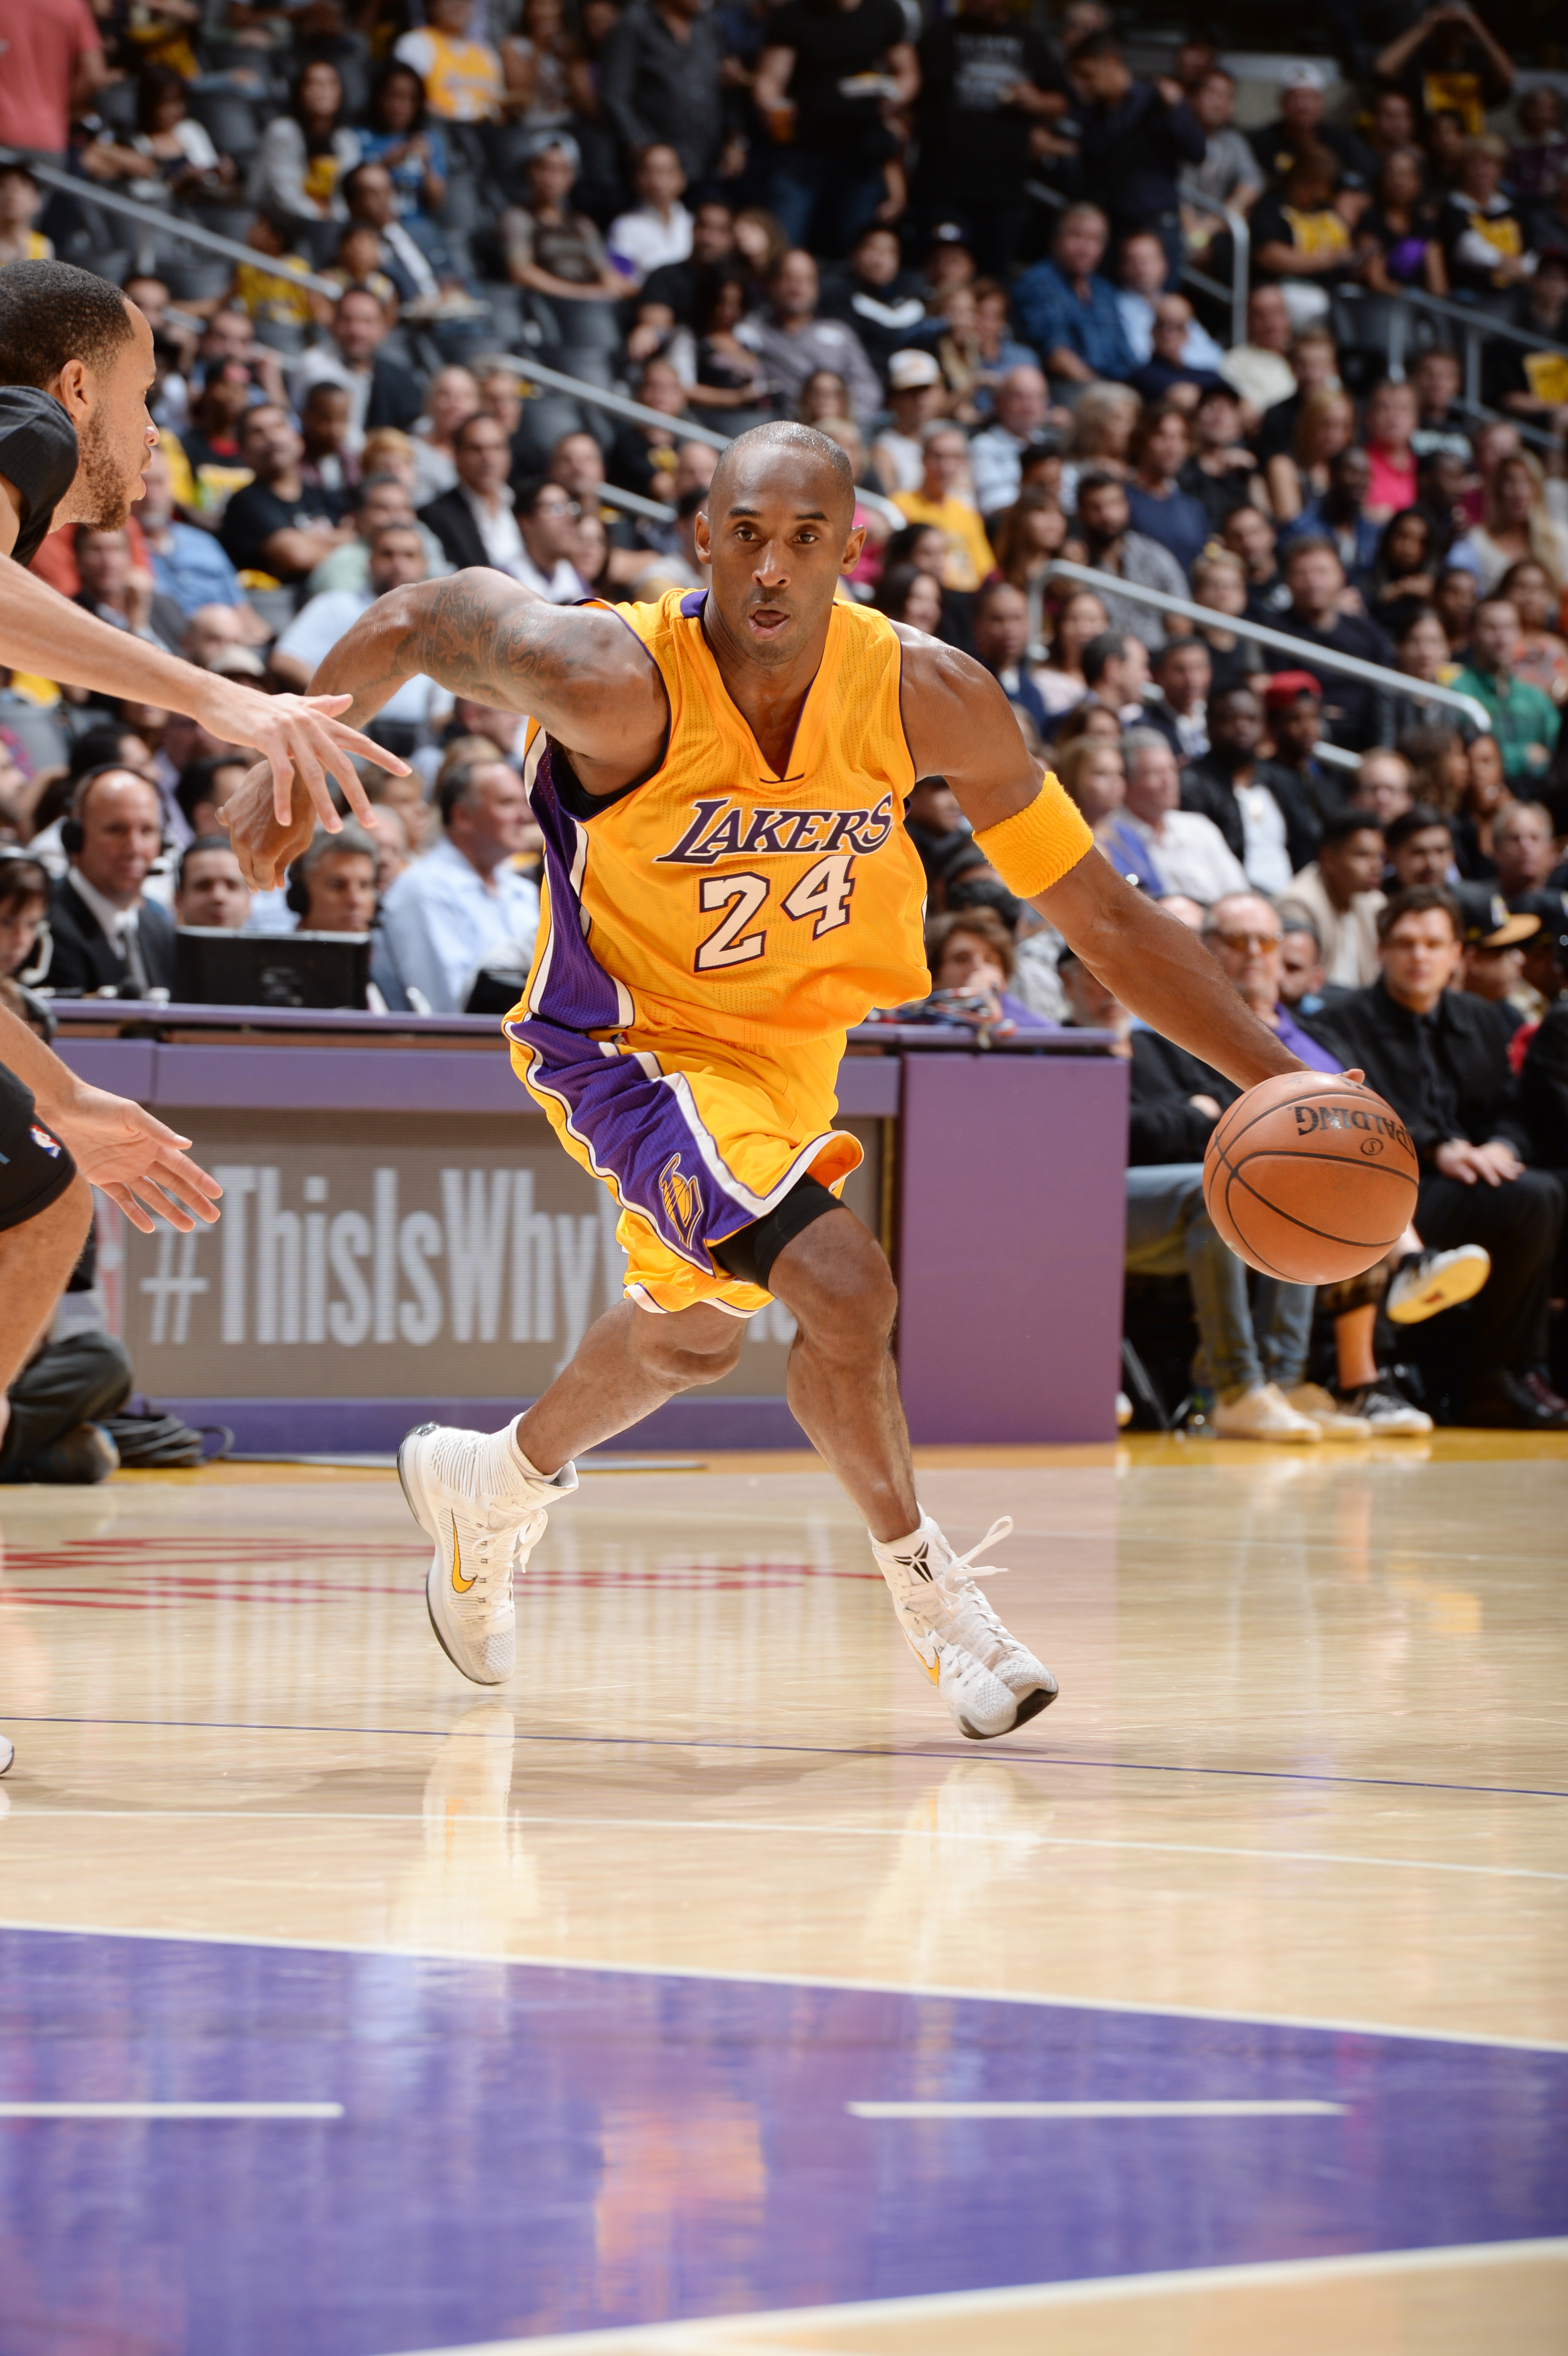 Kobe Bryant #24 of the Los Angeles Lakers handles the ball against the Minnesota Timberwolves on October 28, 2015 at STAPLES Center in Los Angeles, California. (Andrew D. Bernstein—2015 NBAE/Getty Images)